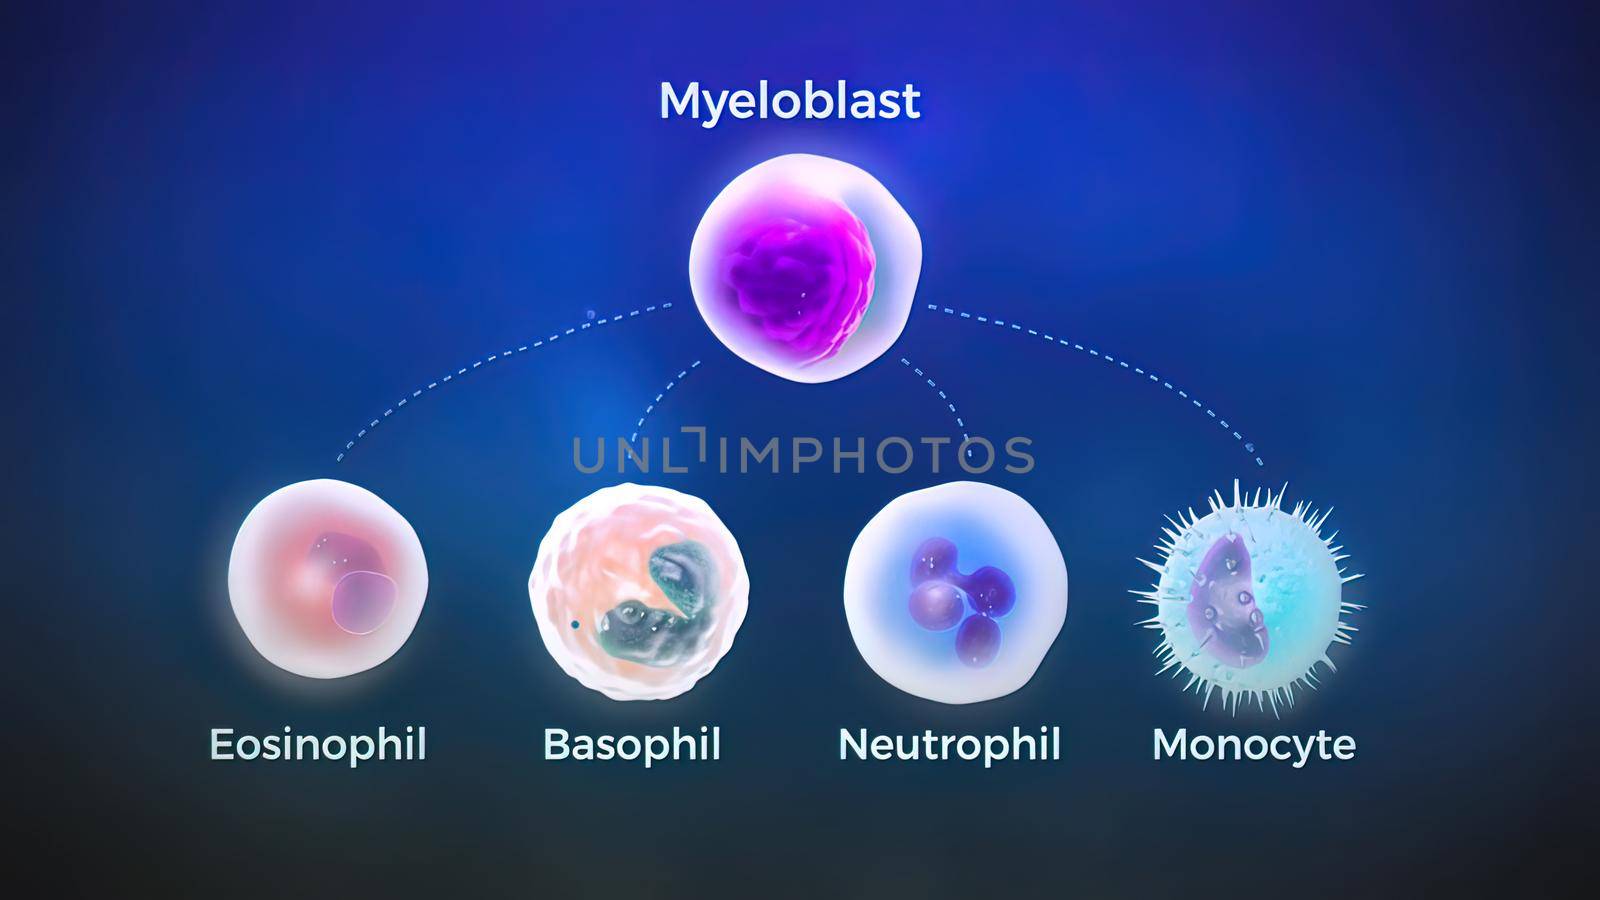 The myeloblast is a unipotent stem cell which differentiates into the effectors by creativepic